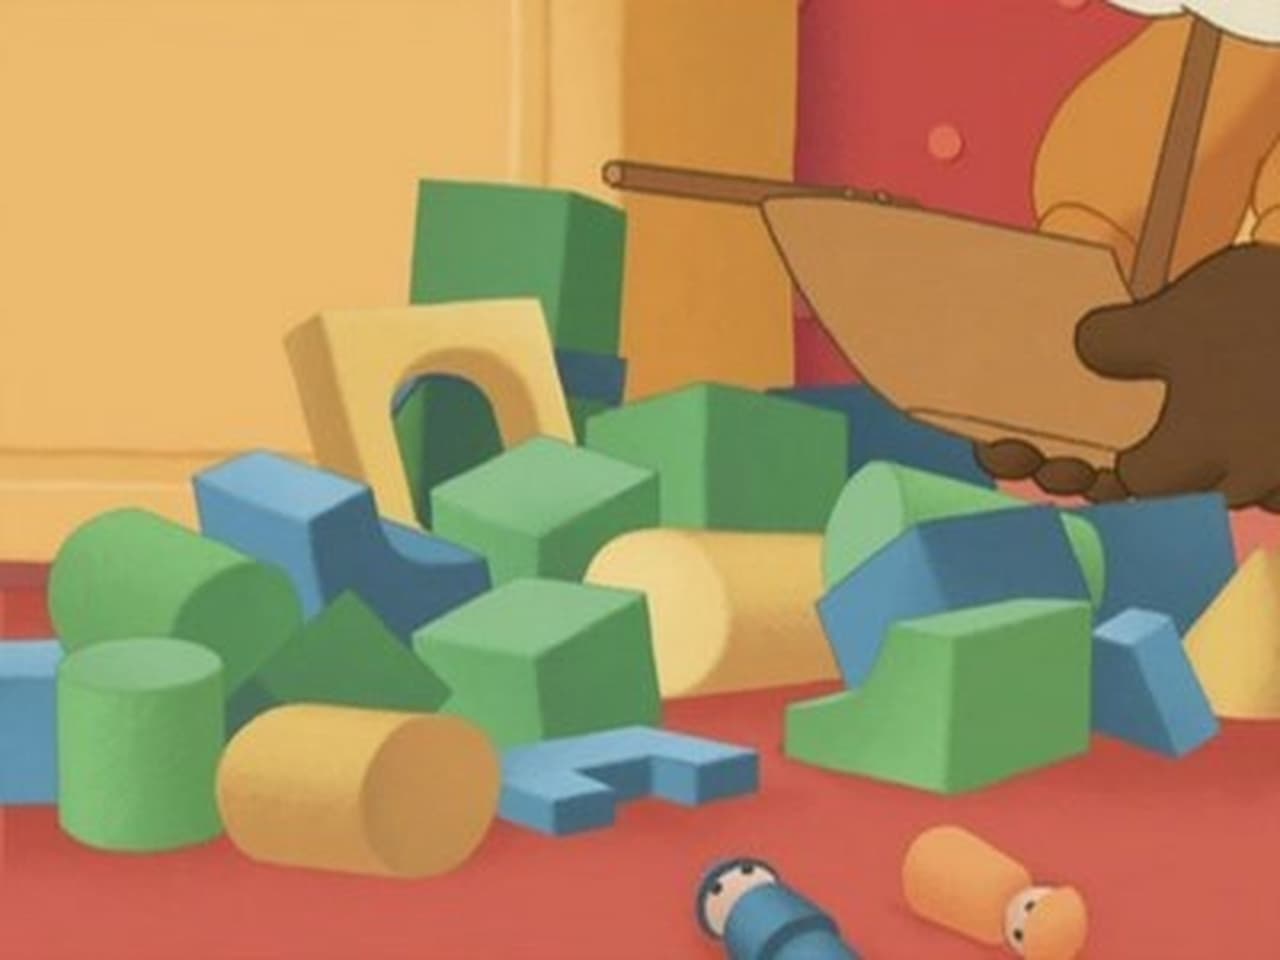 Little Brown Bear picks up his toys